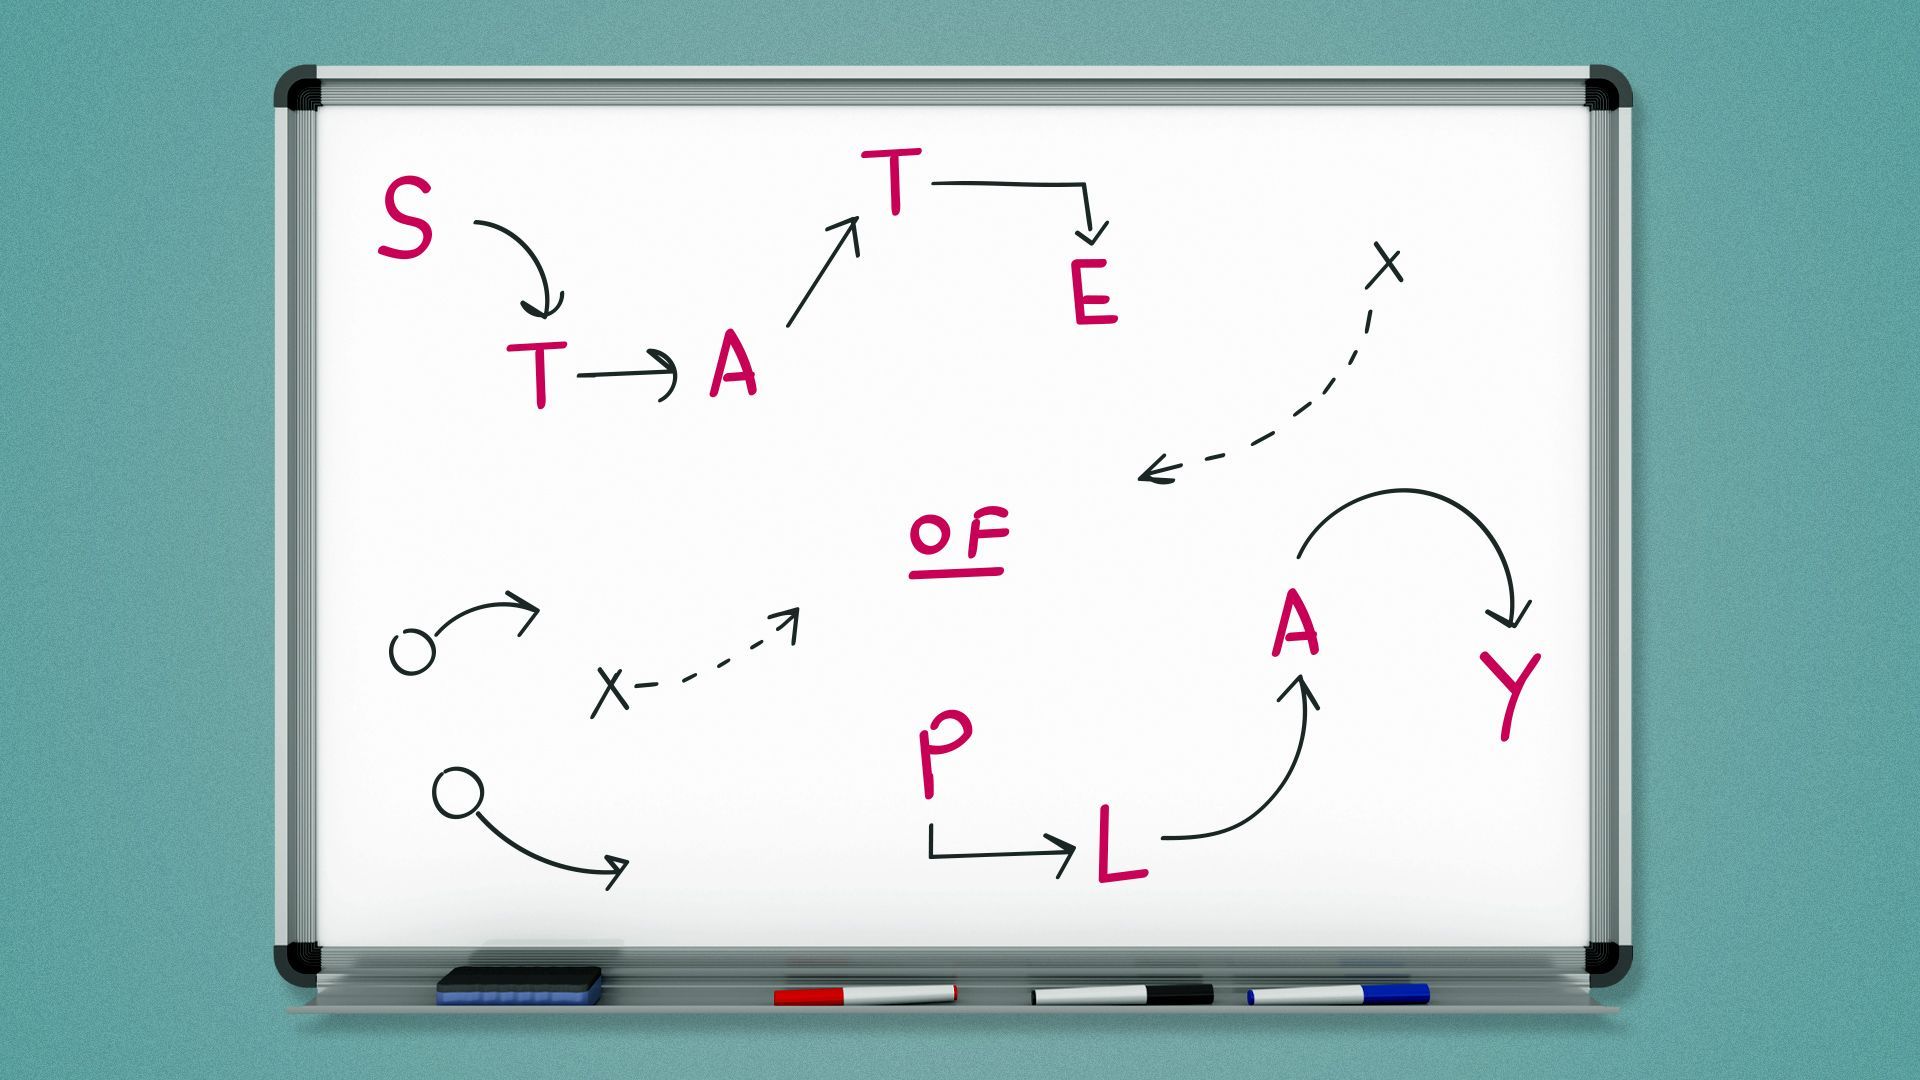 Illustration of a white board with a tactical diagram using letters spelling out "State of Play."